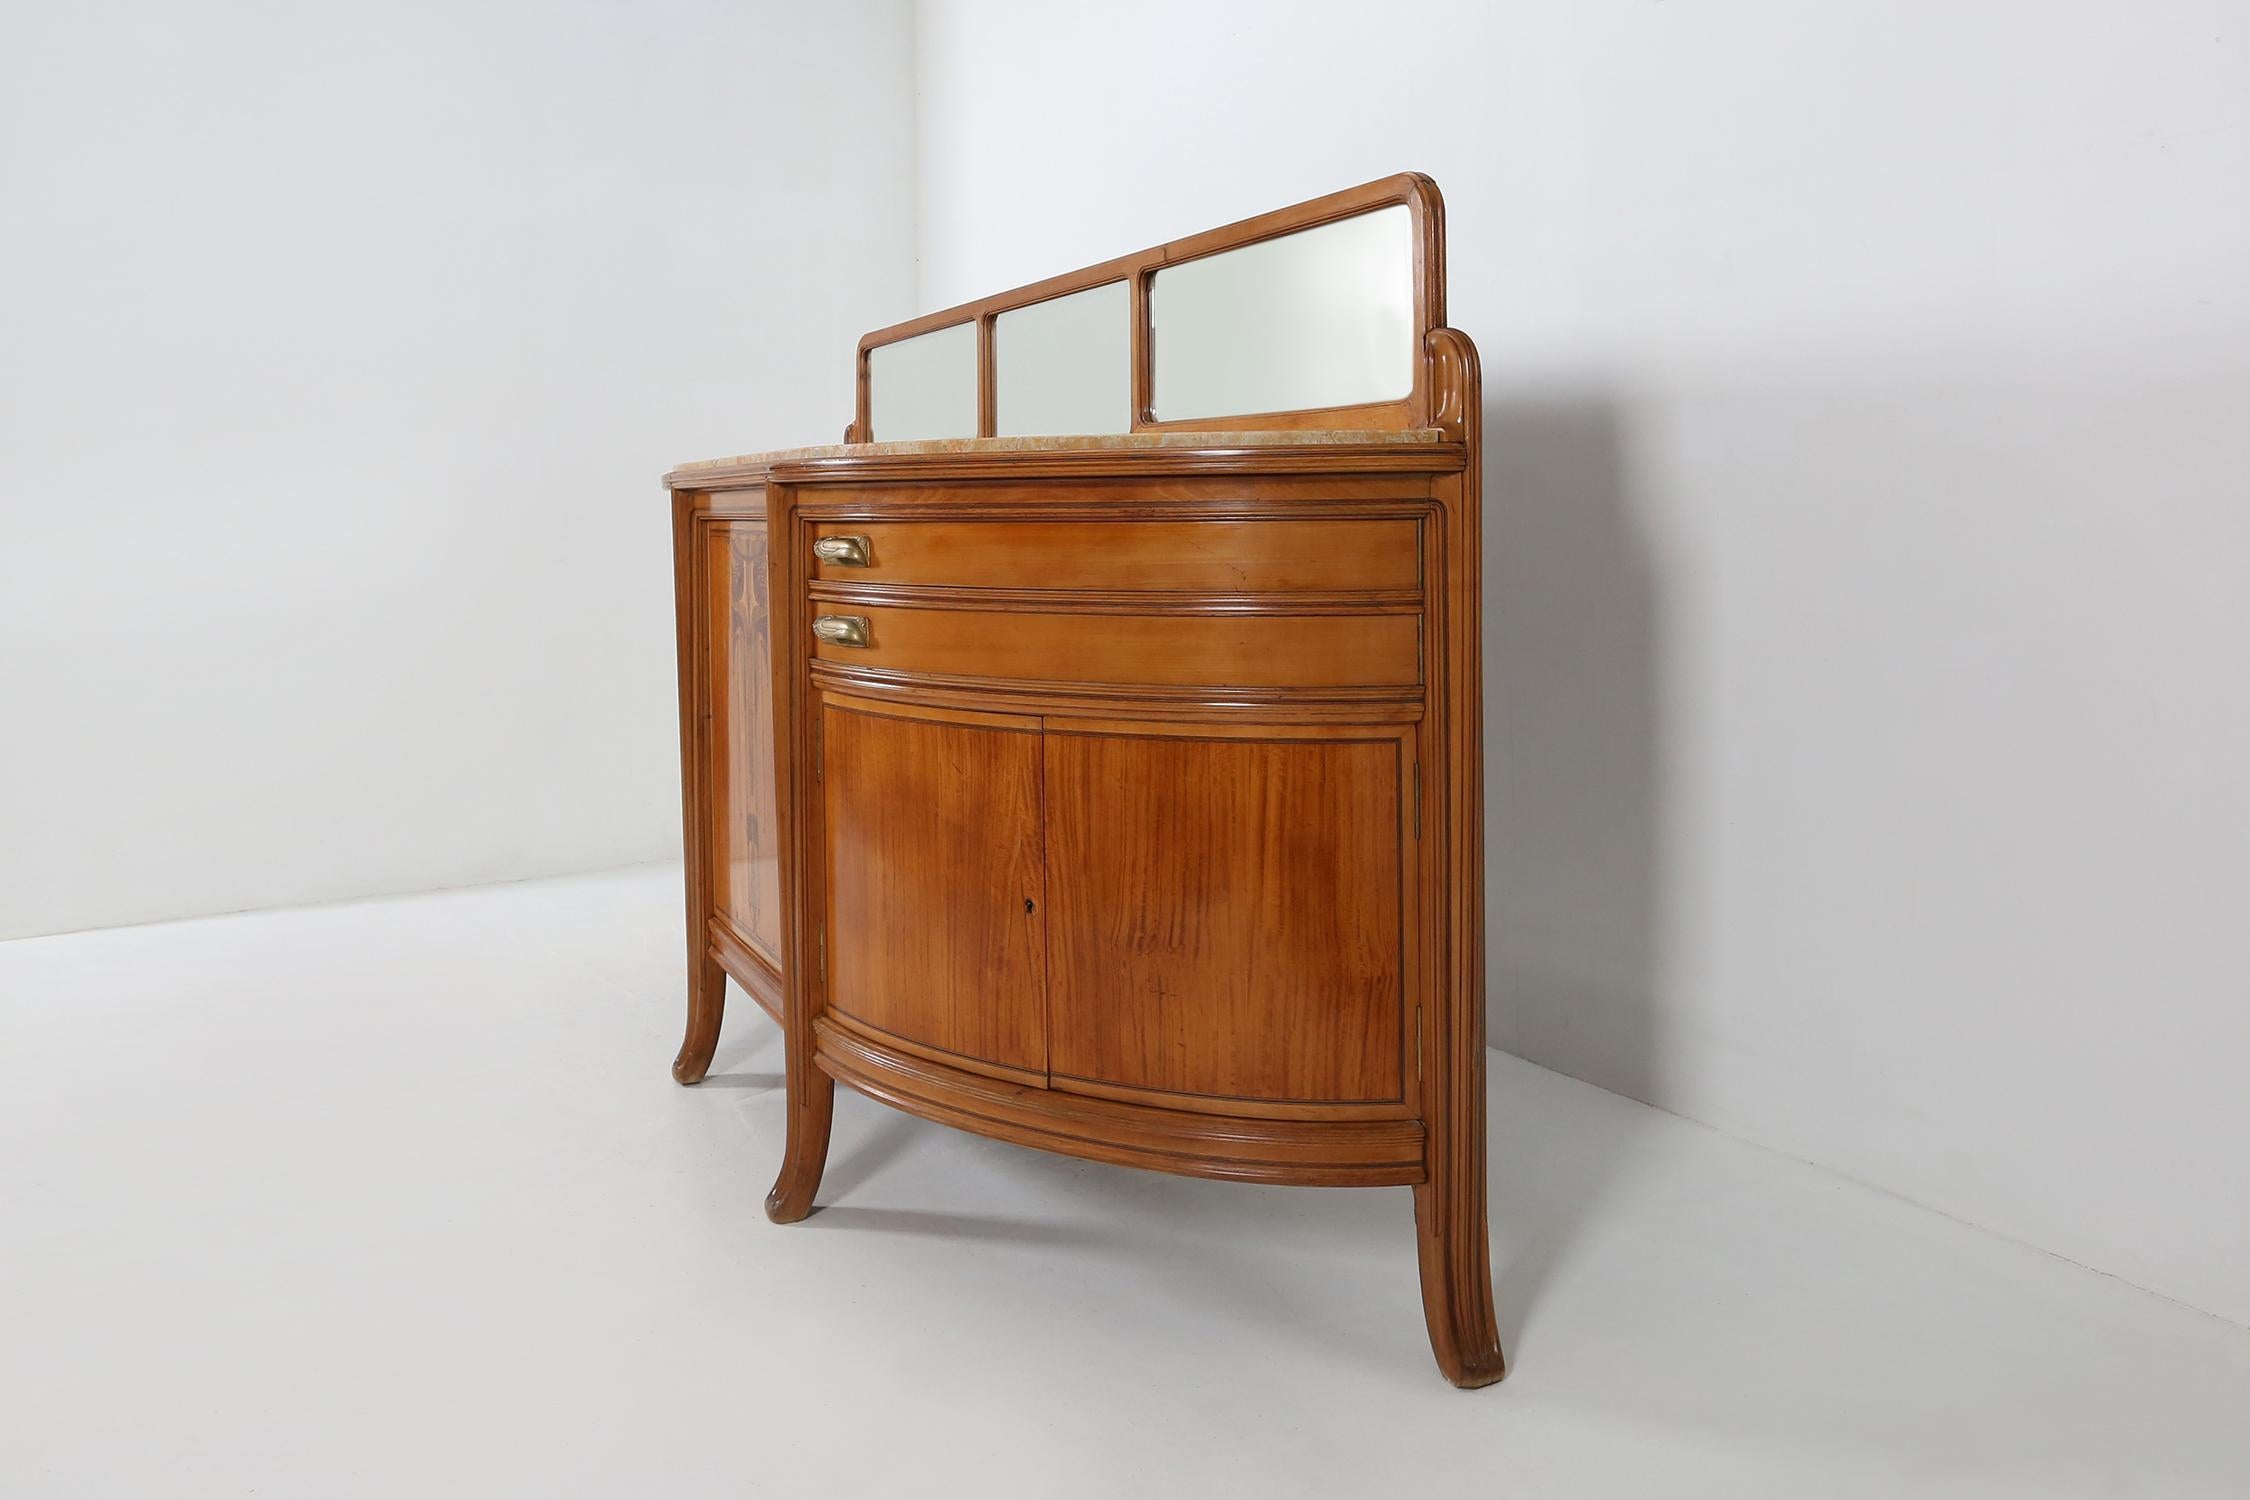 Art Deco sideboard by French designer Maurice Dufrène.
Made of massif walnut wood and a beige marble top.
beautiful inlay wood in the front door and moon-shaped drawers with bronze handles.

This cabinet was exhibited at the 